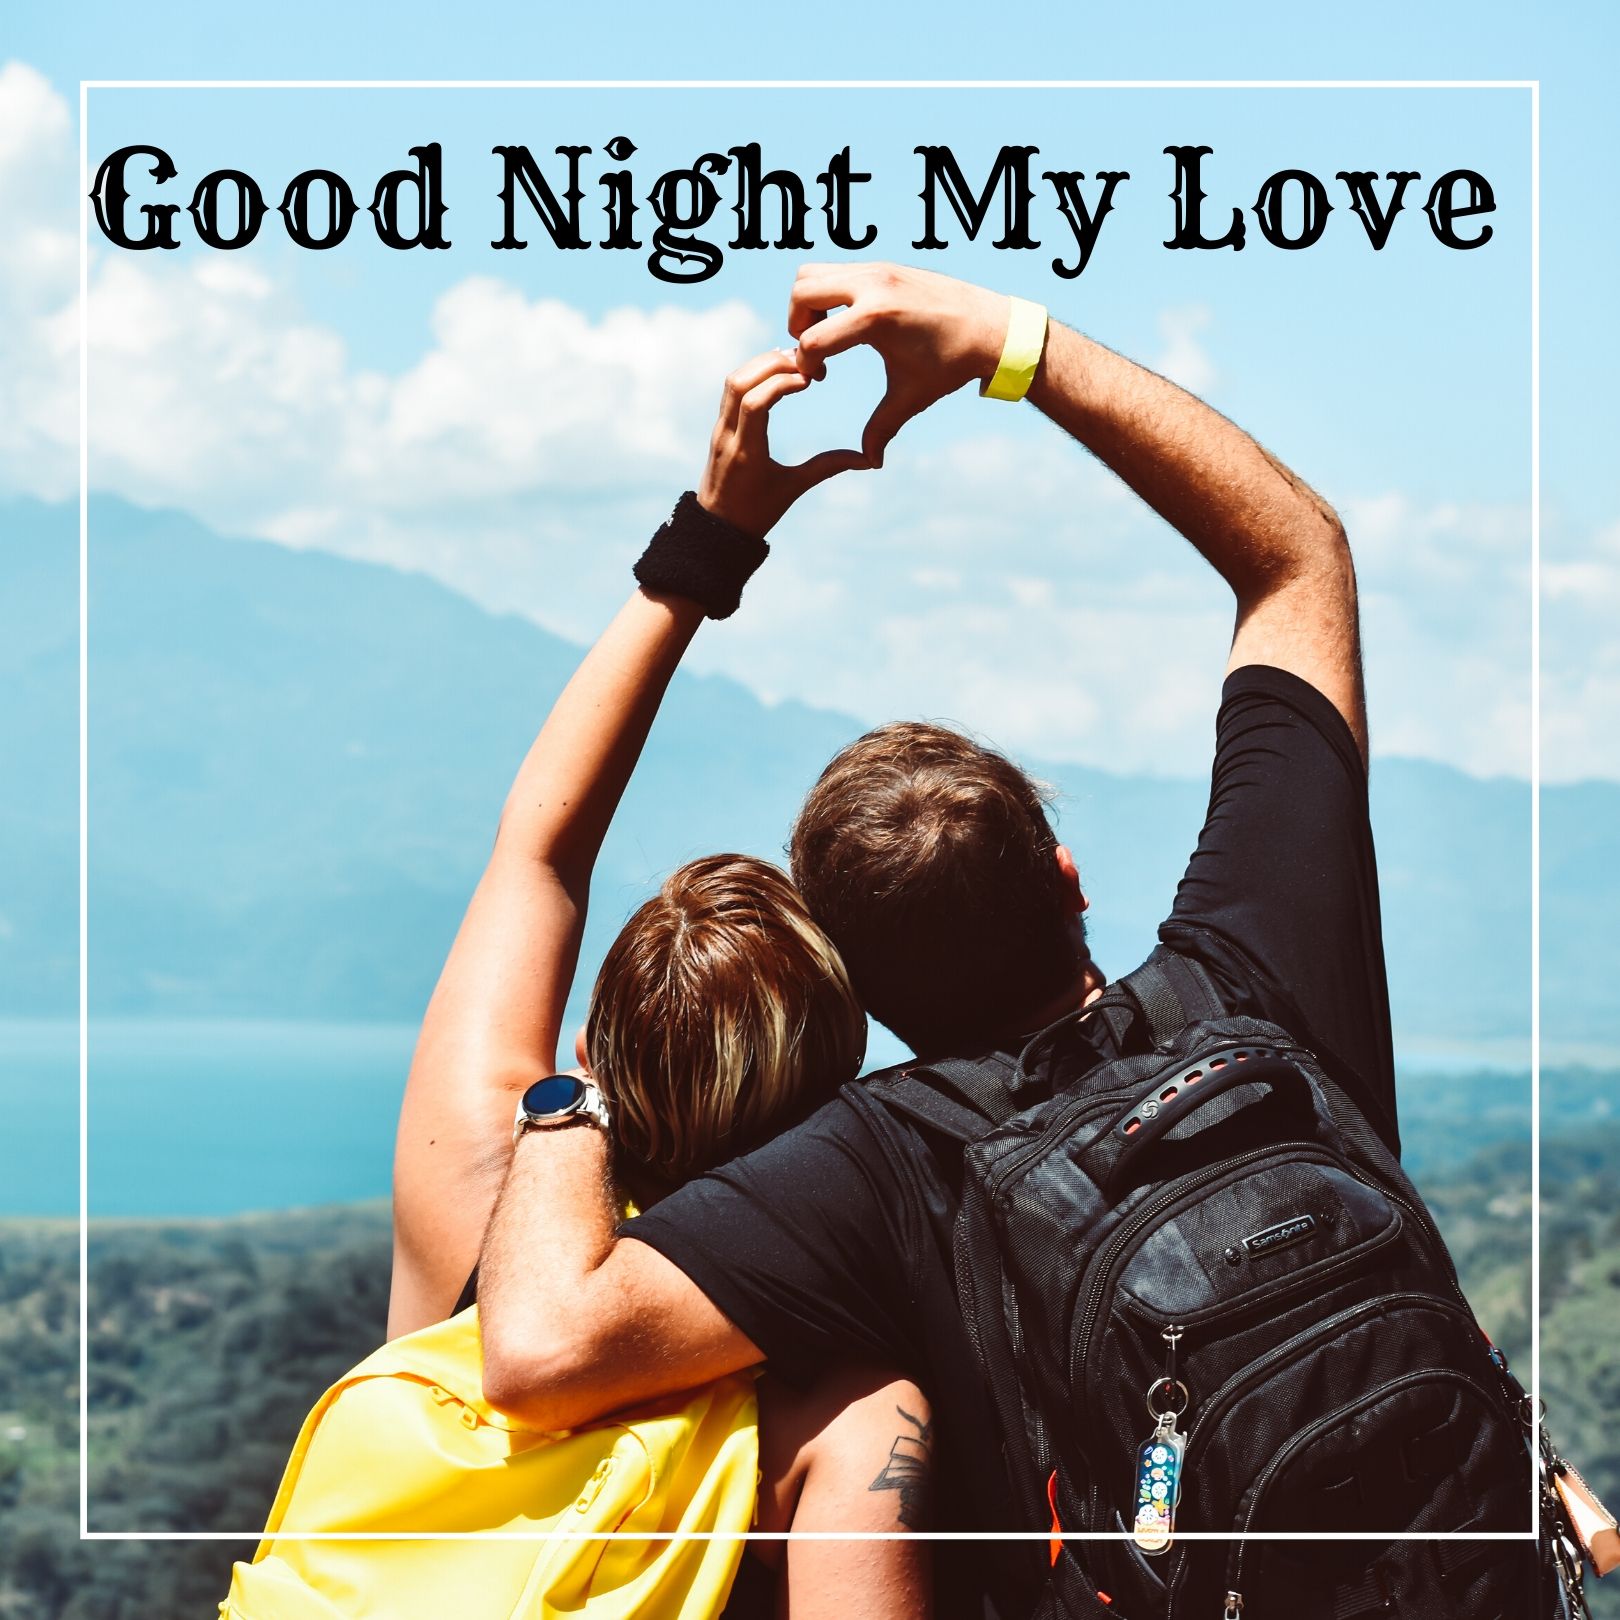 🔥 Good Night my love image Download free - Images SRkh